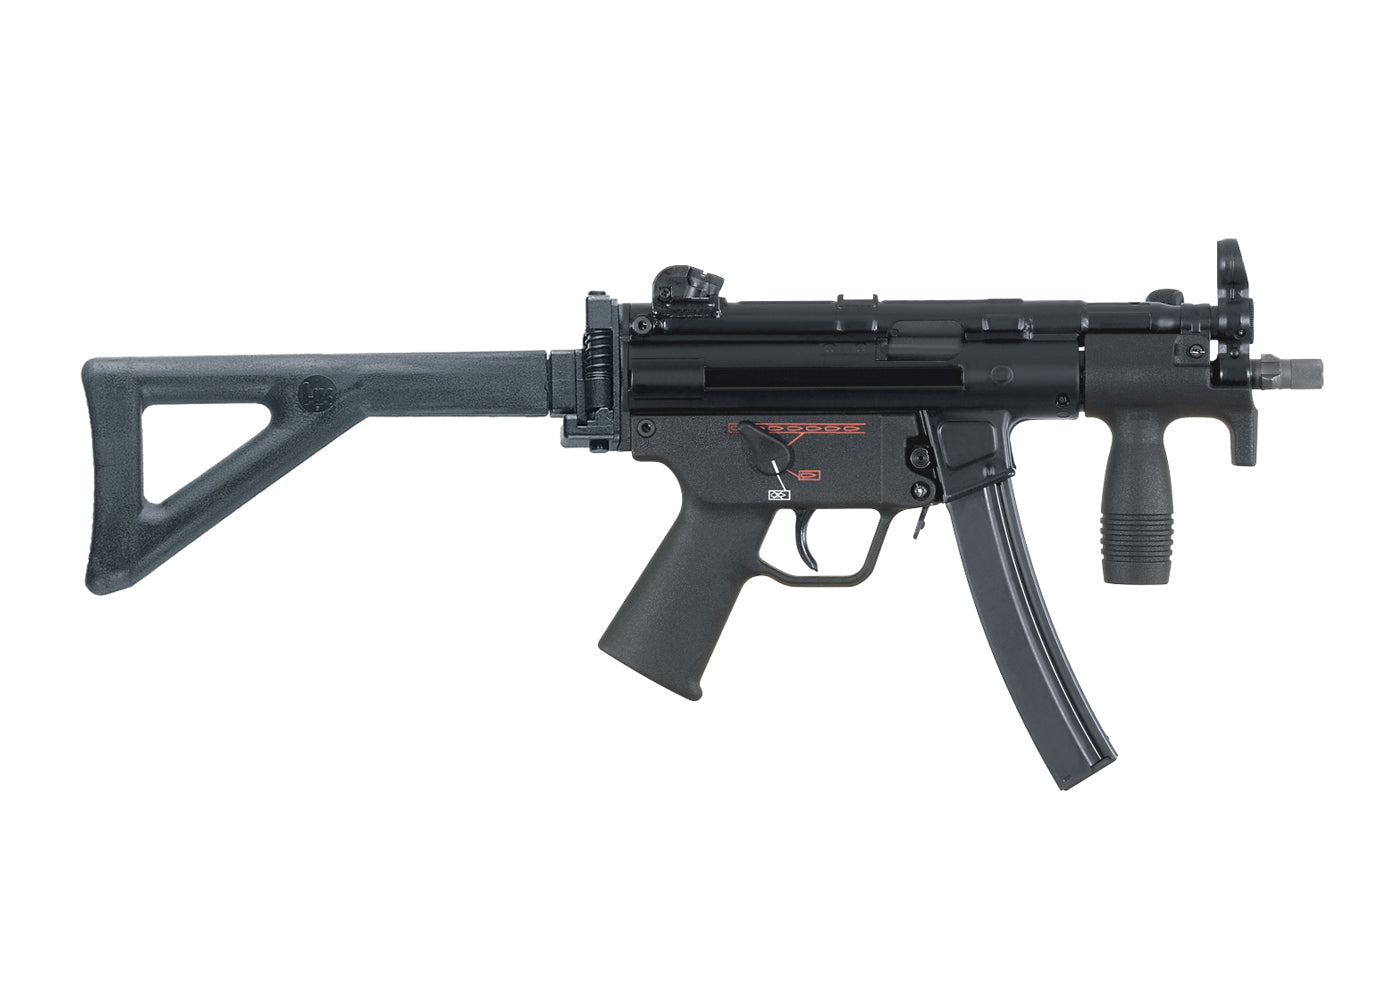 H&K MP5K PDW 9MM WITH B&T TELESCOPIC STOCK, AND ACCESSORIES (NFA ITEM) E-FORM 3